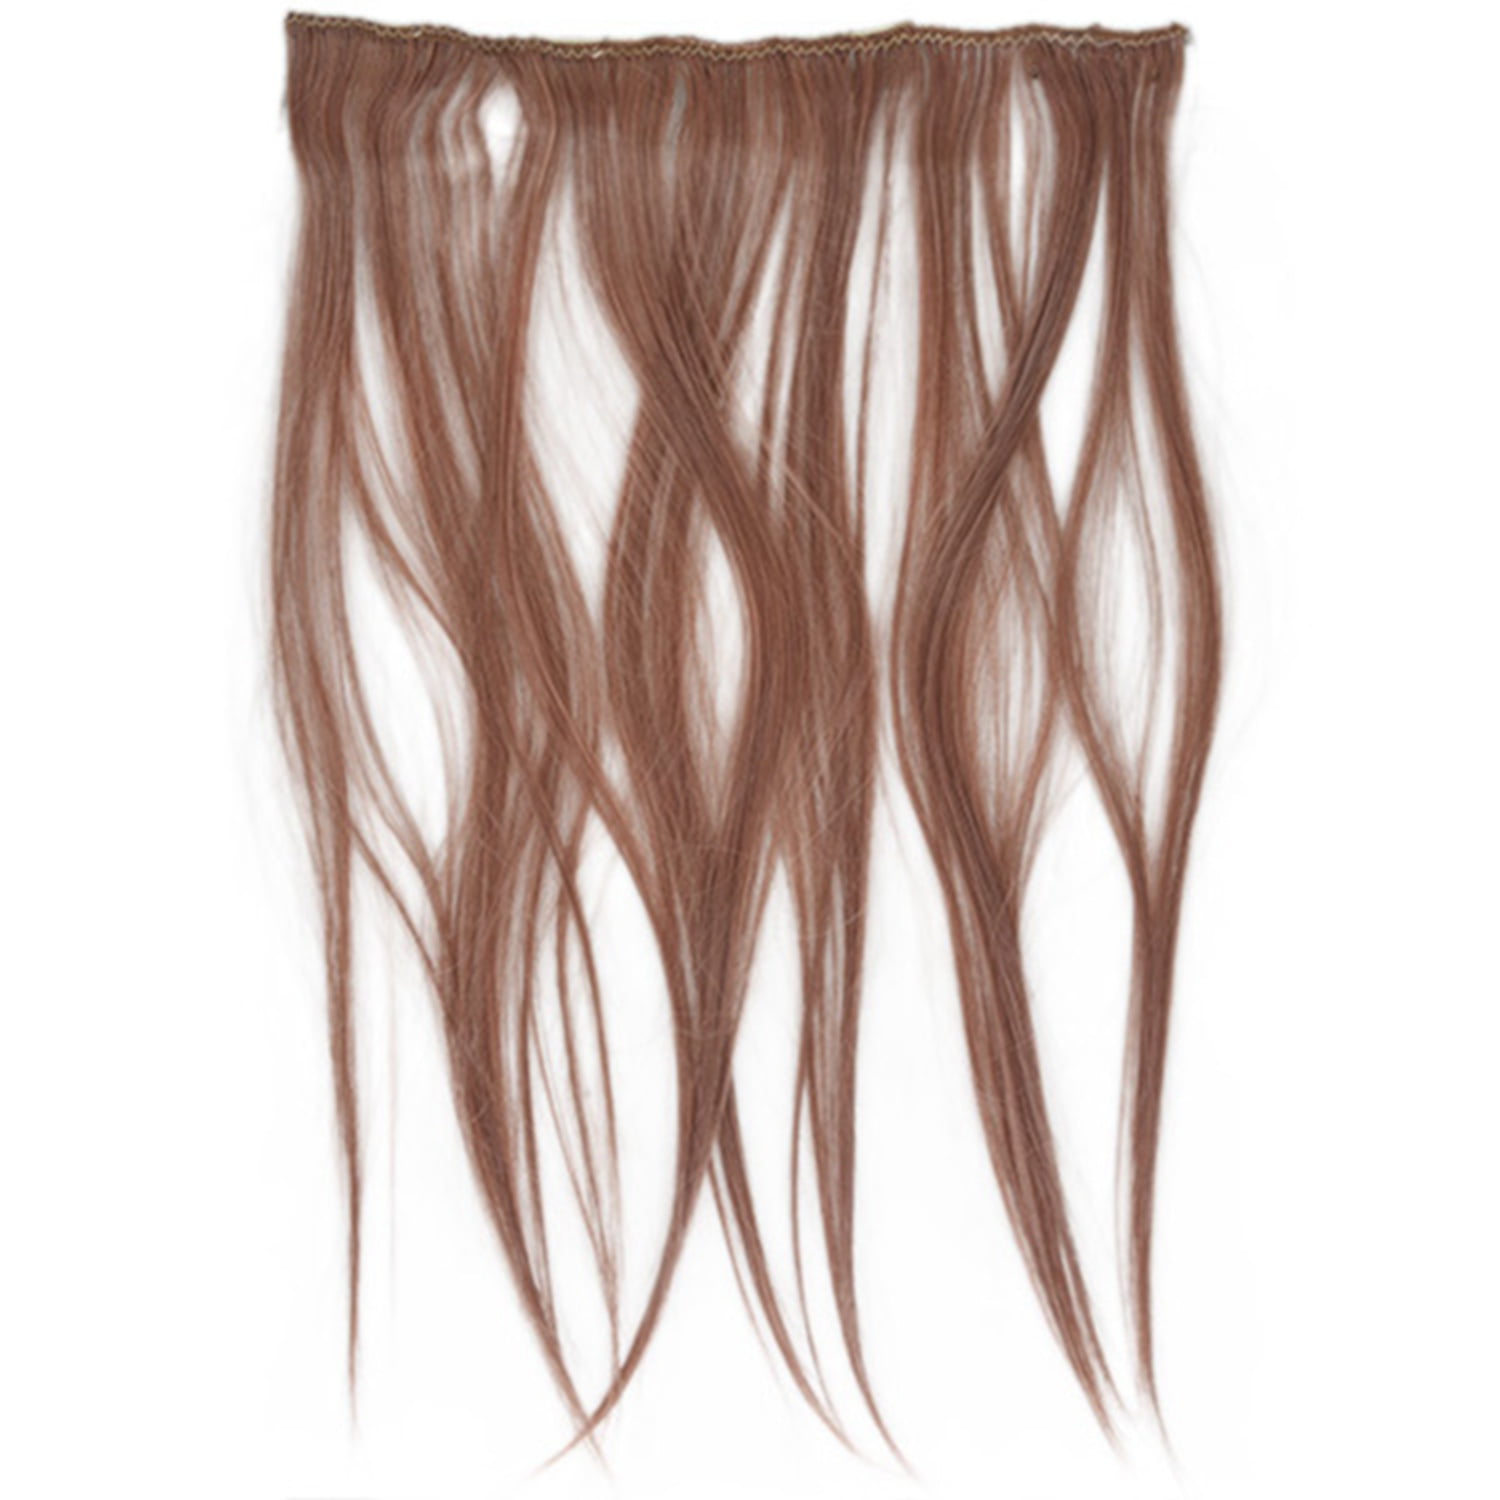 Tycncty Women In Hair Extensions 7pcs 70g 15inch Chestnut-color -  